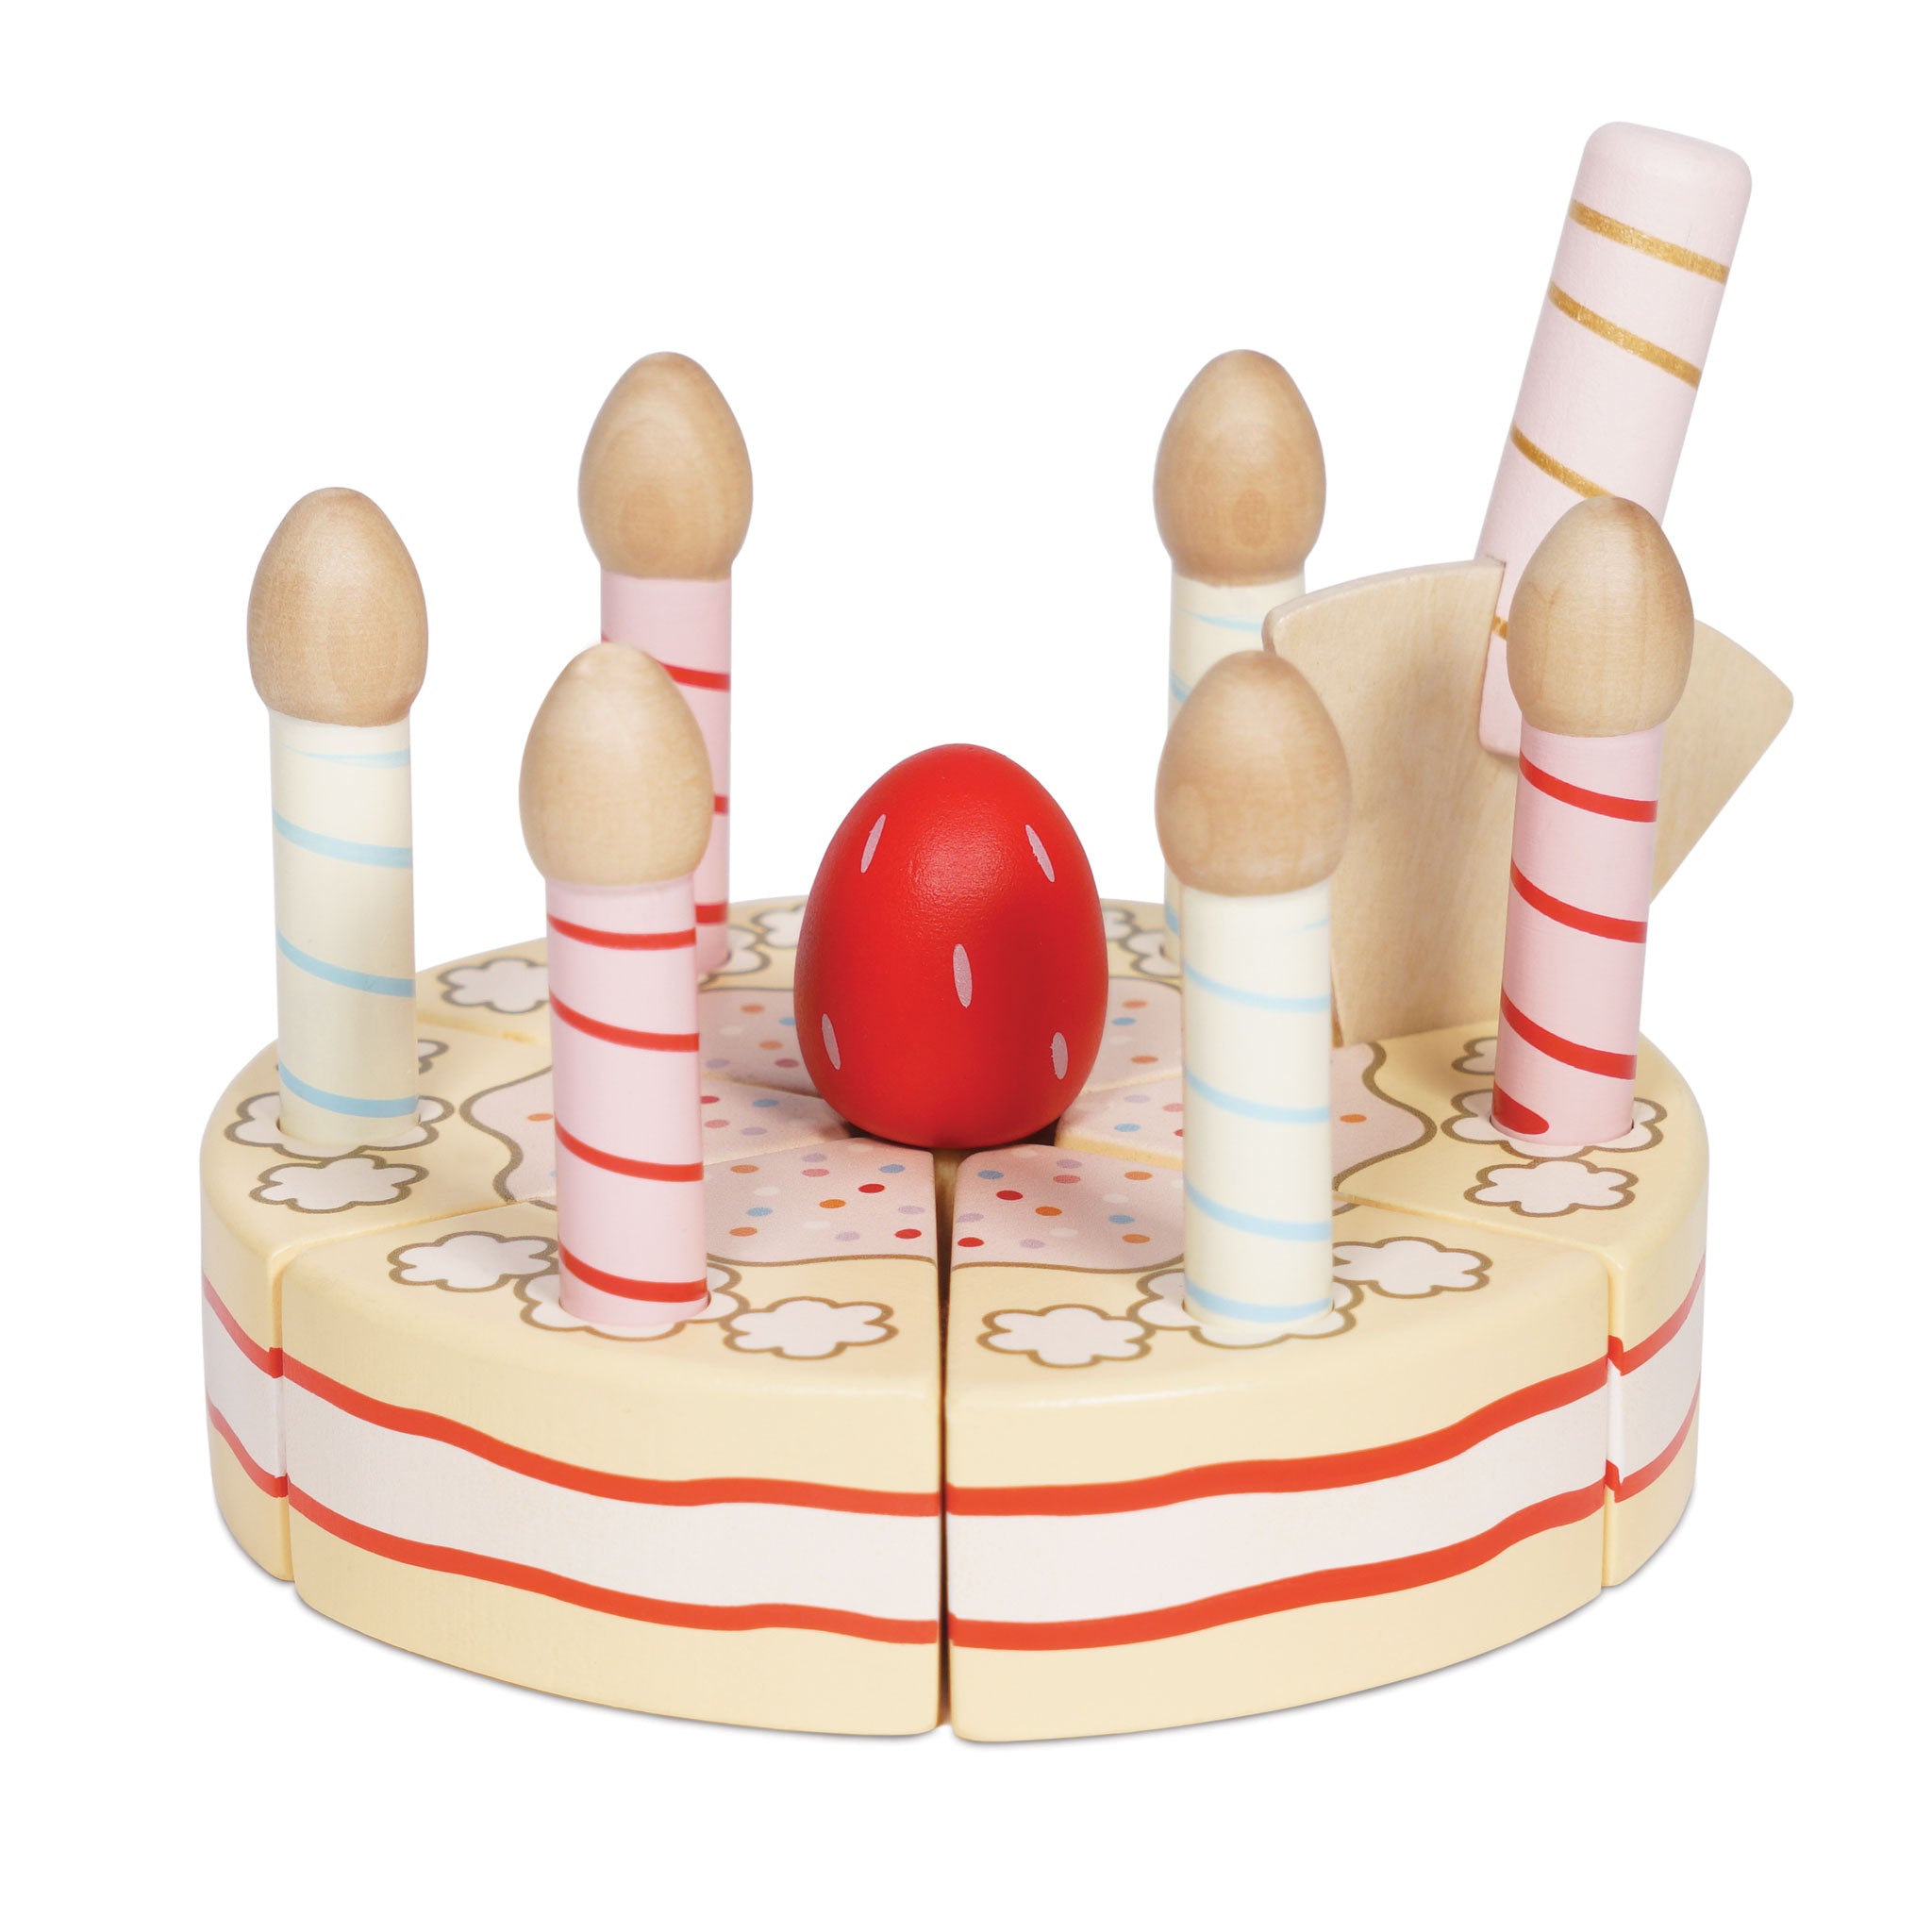 Sliceable Birthday Cake & Candles